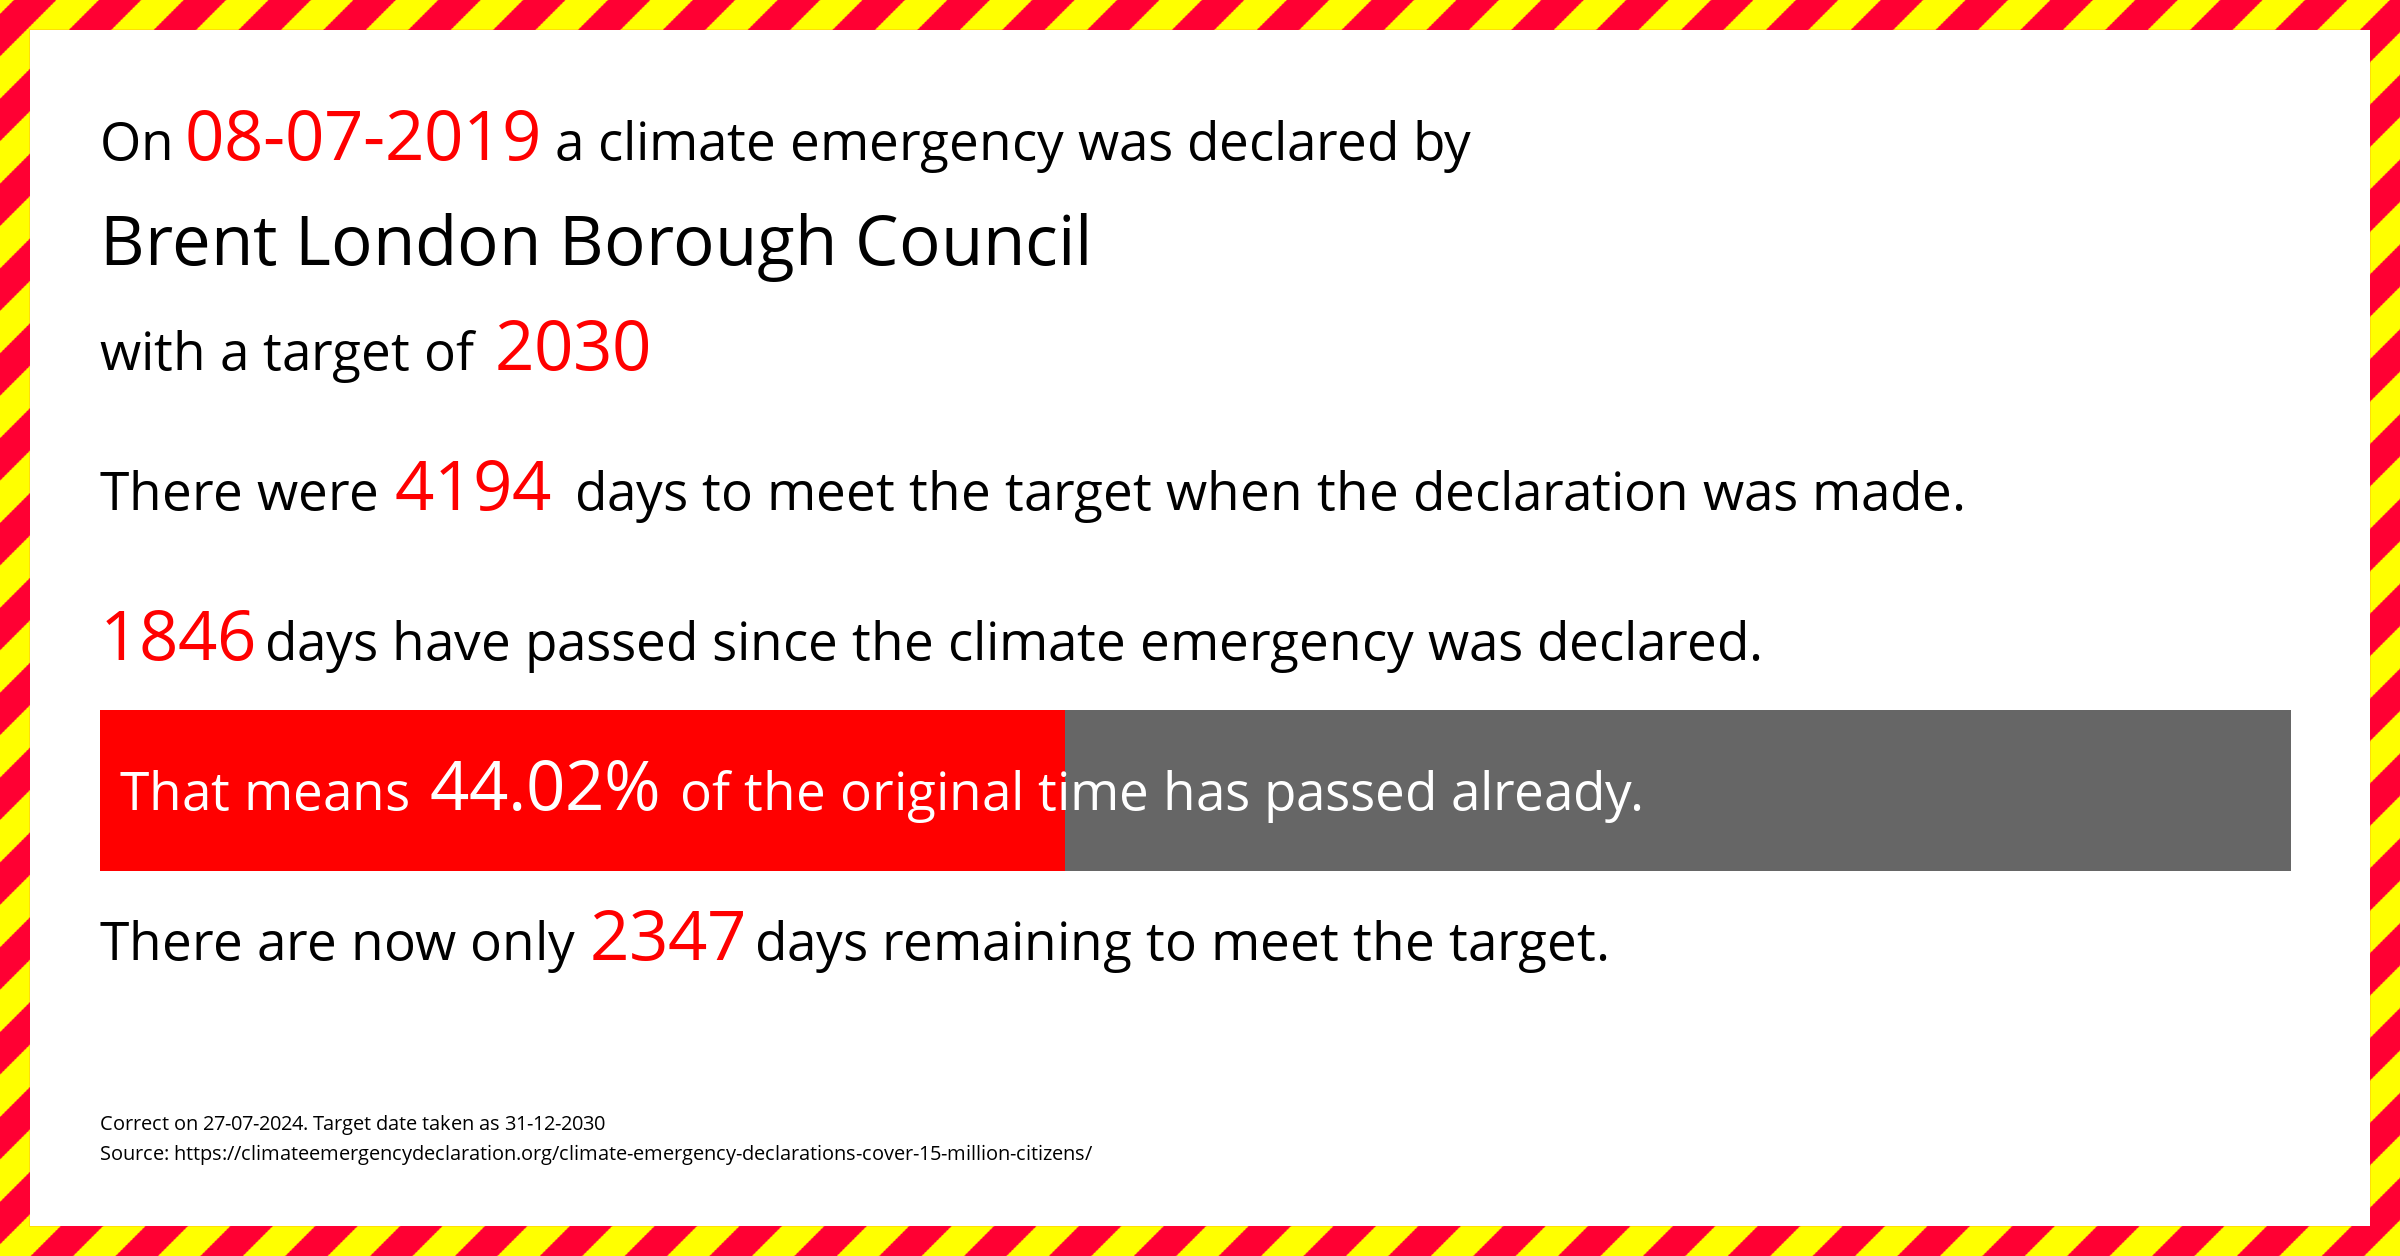 Brent London Borough Council declared a Climate emergency on Monday 8th July 2019, with a target of 2030.